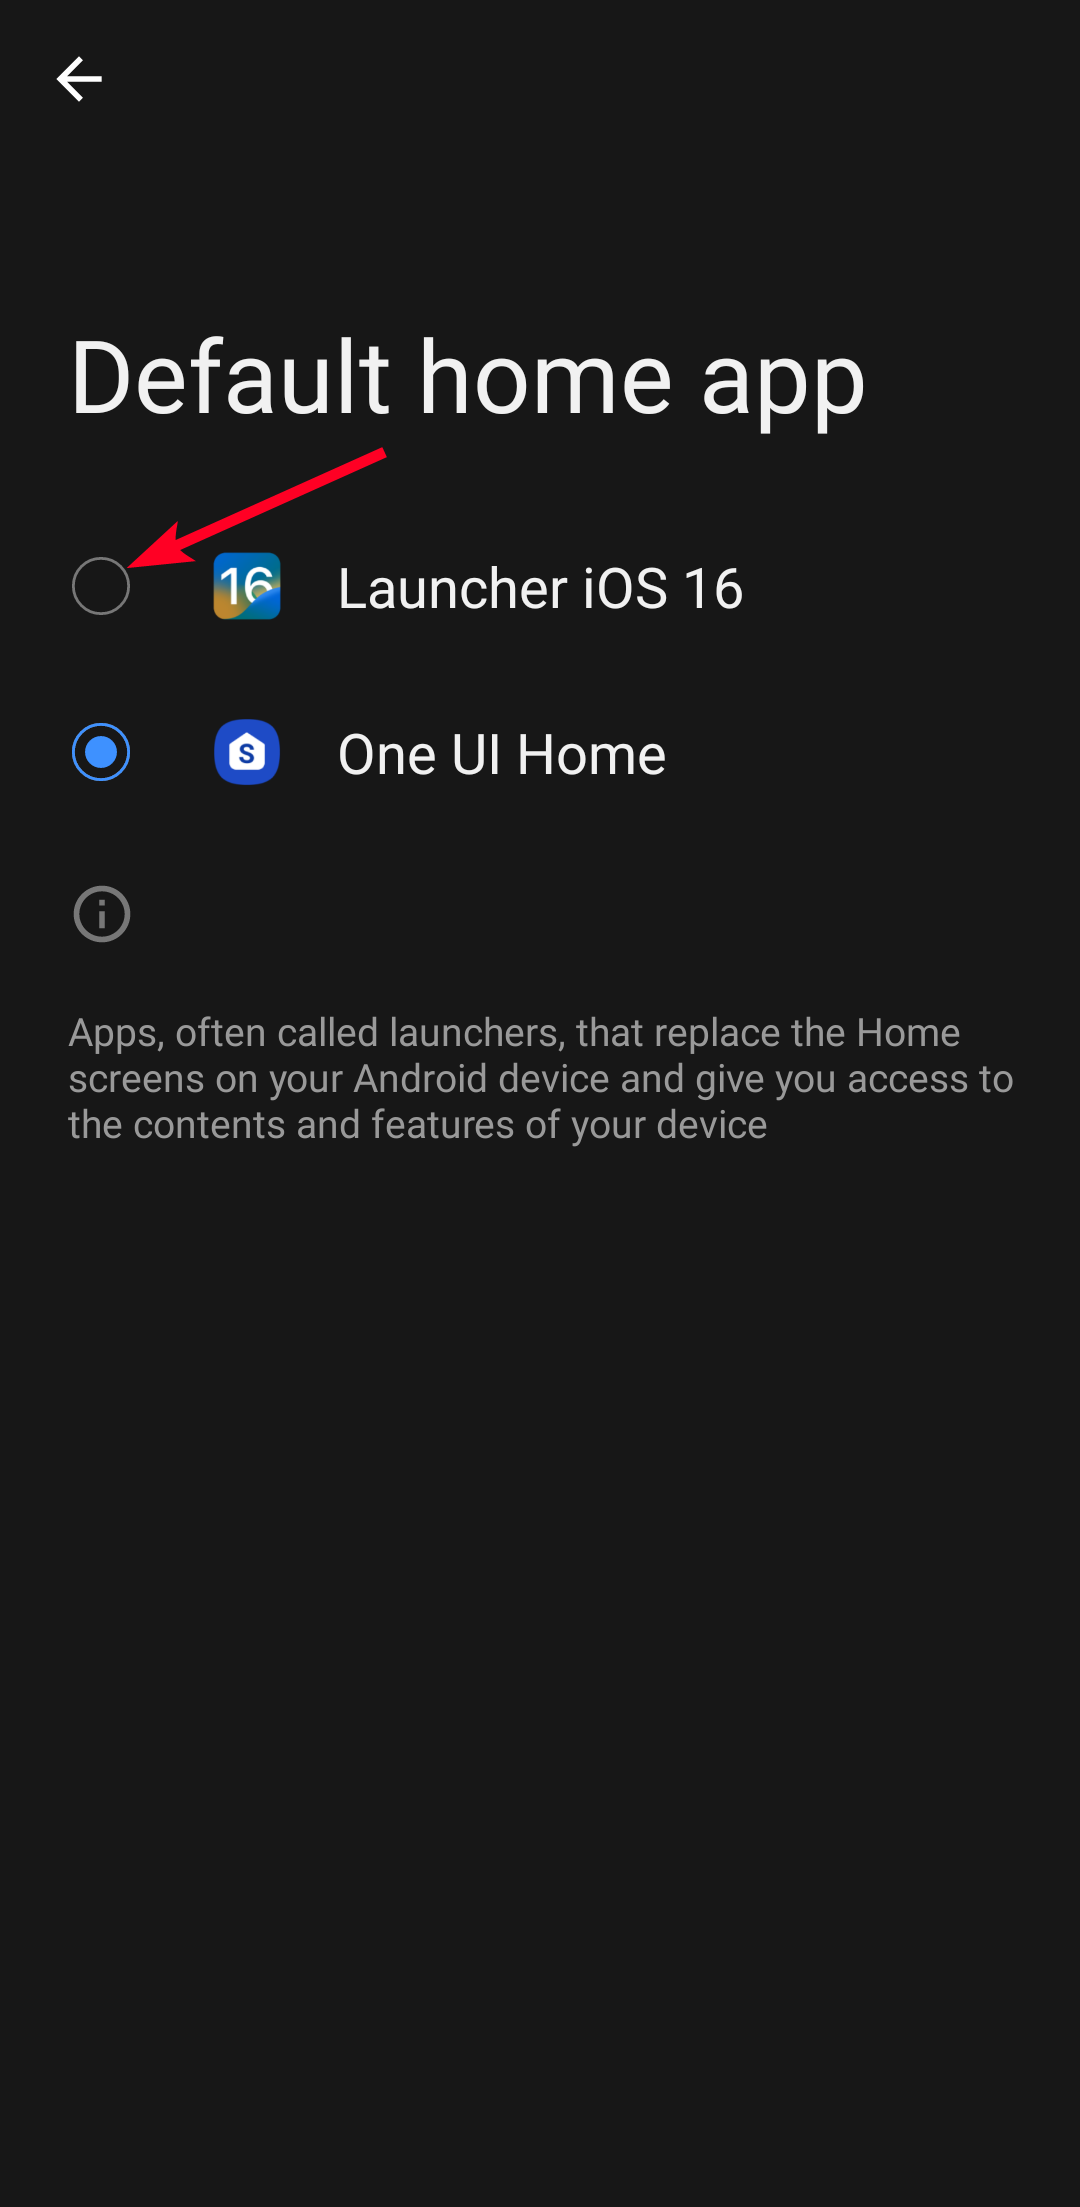  A screenshot showing the default home app menu on Android